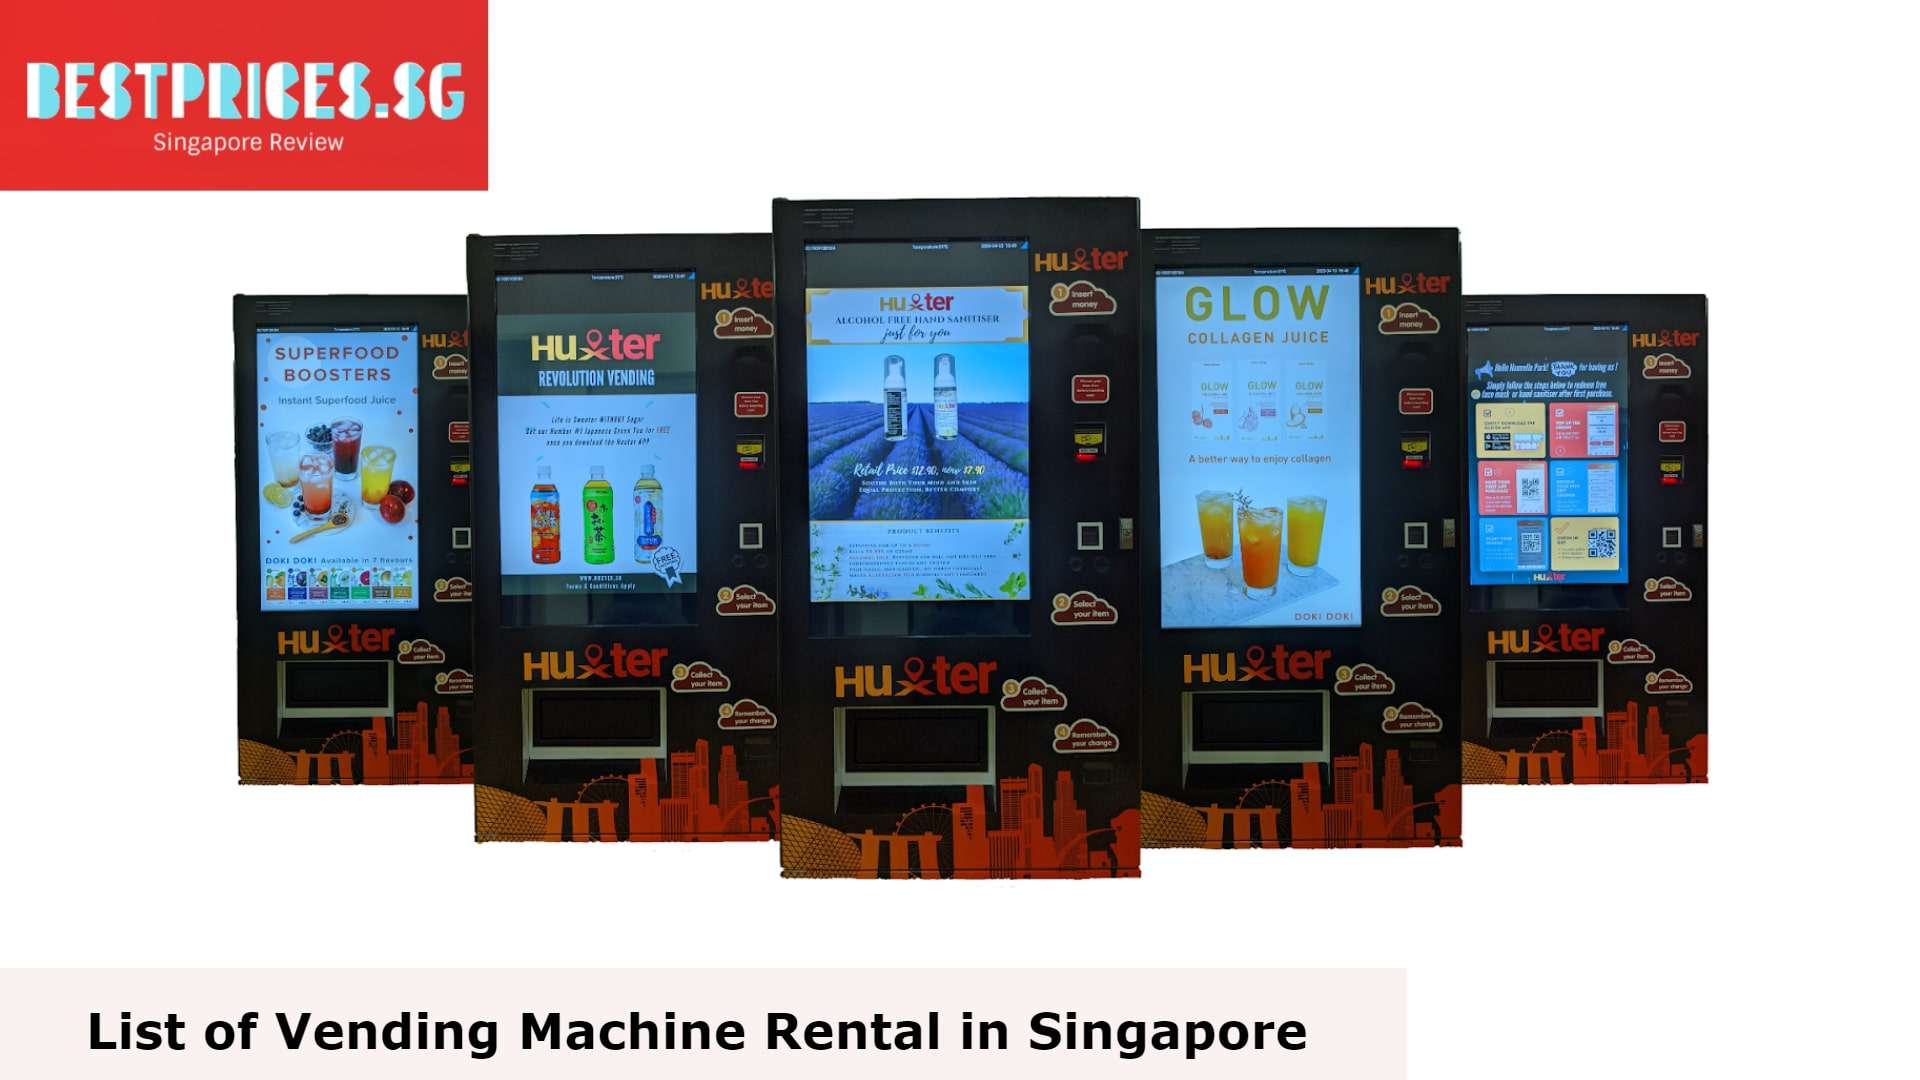 Huxter - Vending Machine Rental Singapore, Vending Machine Rental Singapore, Vending Machine business start guide Singapore, Can I just set up a vending machine?, Can I buy a vending machine and put it anywhere?, Vending Machine Suppliers Singapore, Does vending machine make good money?, vending machine singapore location, vending machine singapore rental, Snack vending machine Singapore, hot food vending machine singapore, halal vending machine singapore, Do you need license for vending machine in Singapore?, 